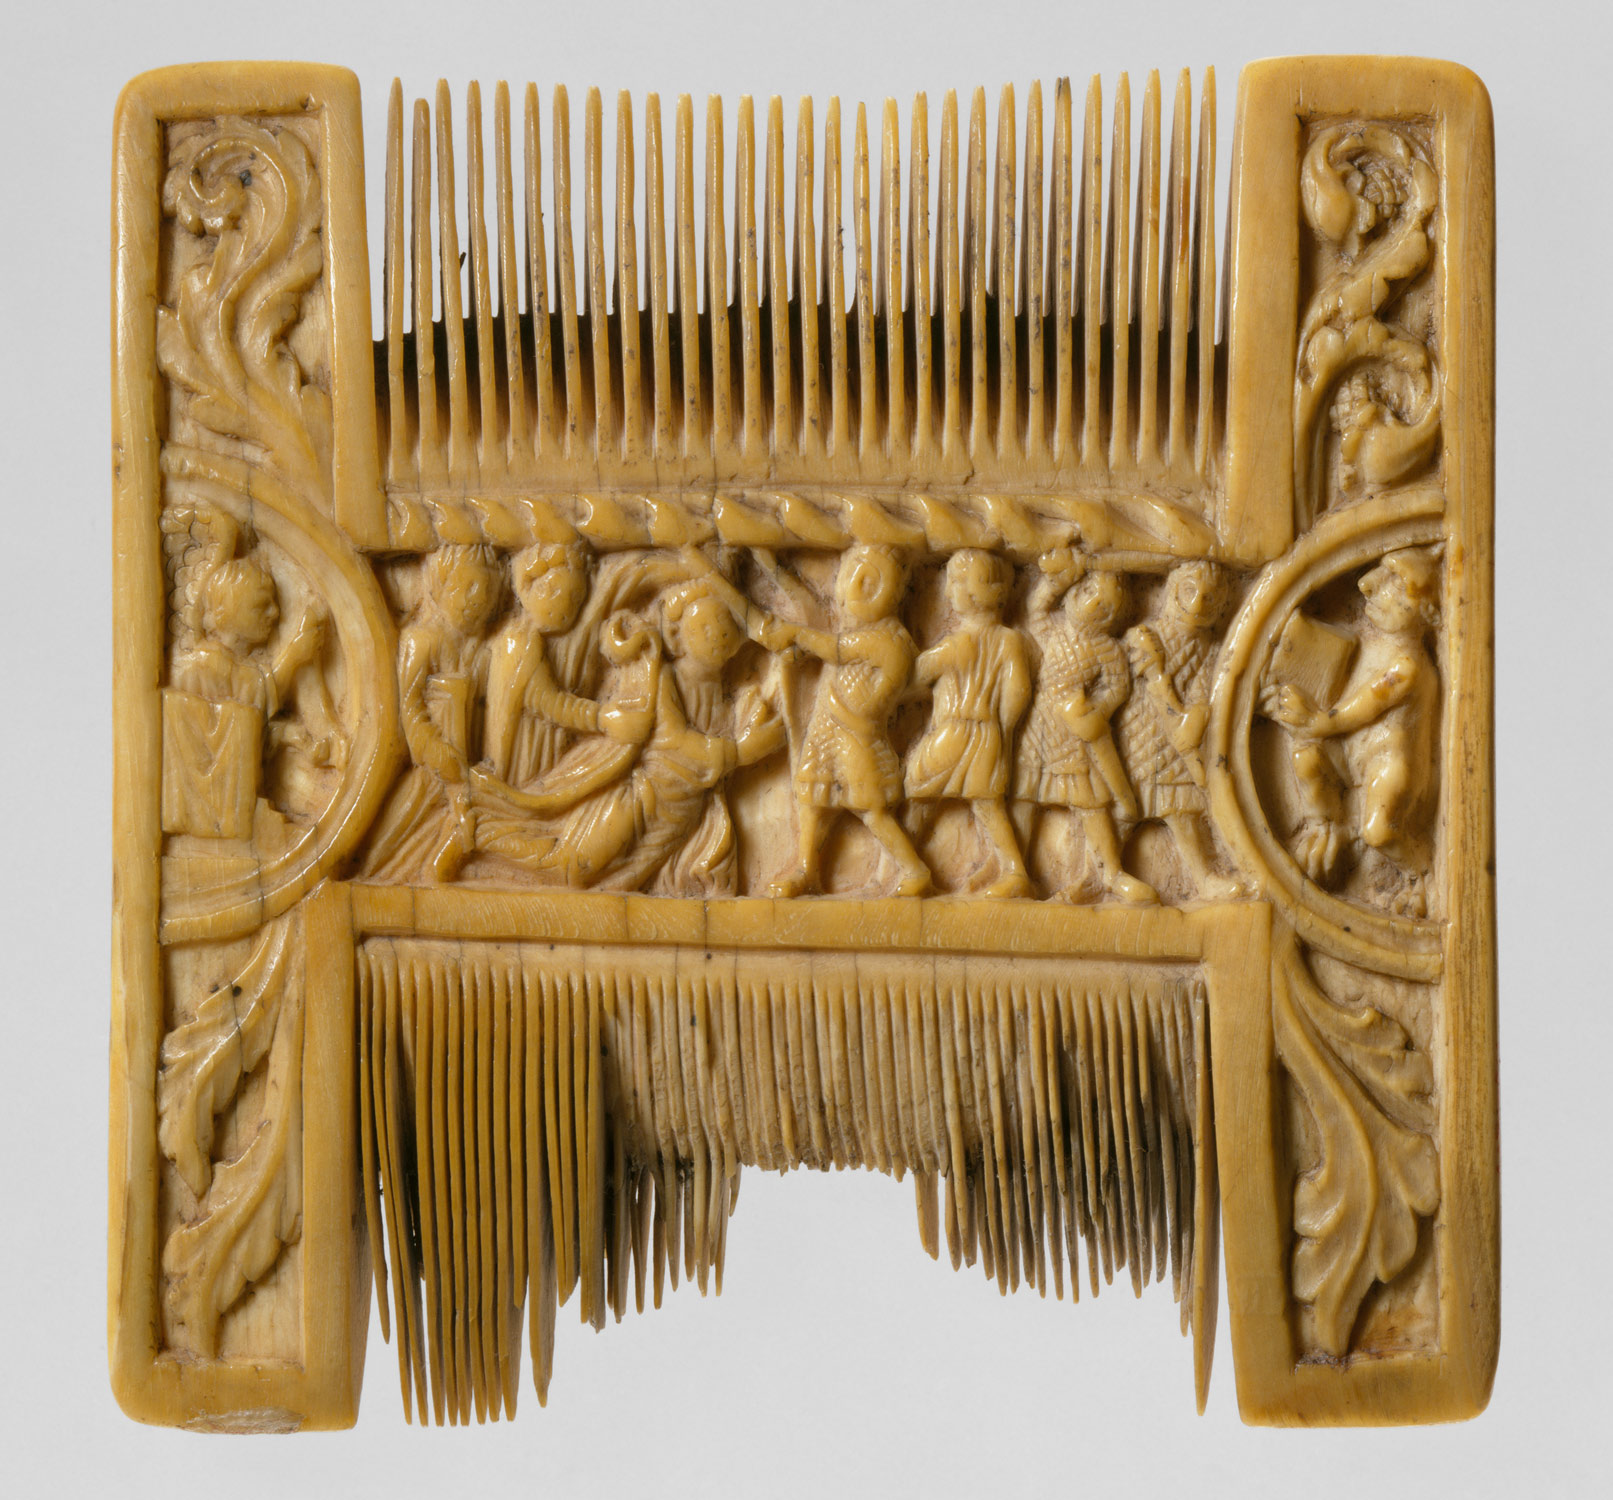 Double-Sided Ivory Liturgical Comb with Scenes of Henry II and Thomas Becket